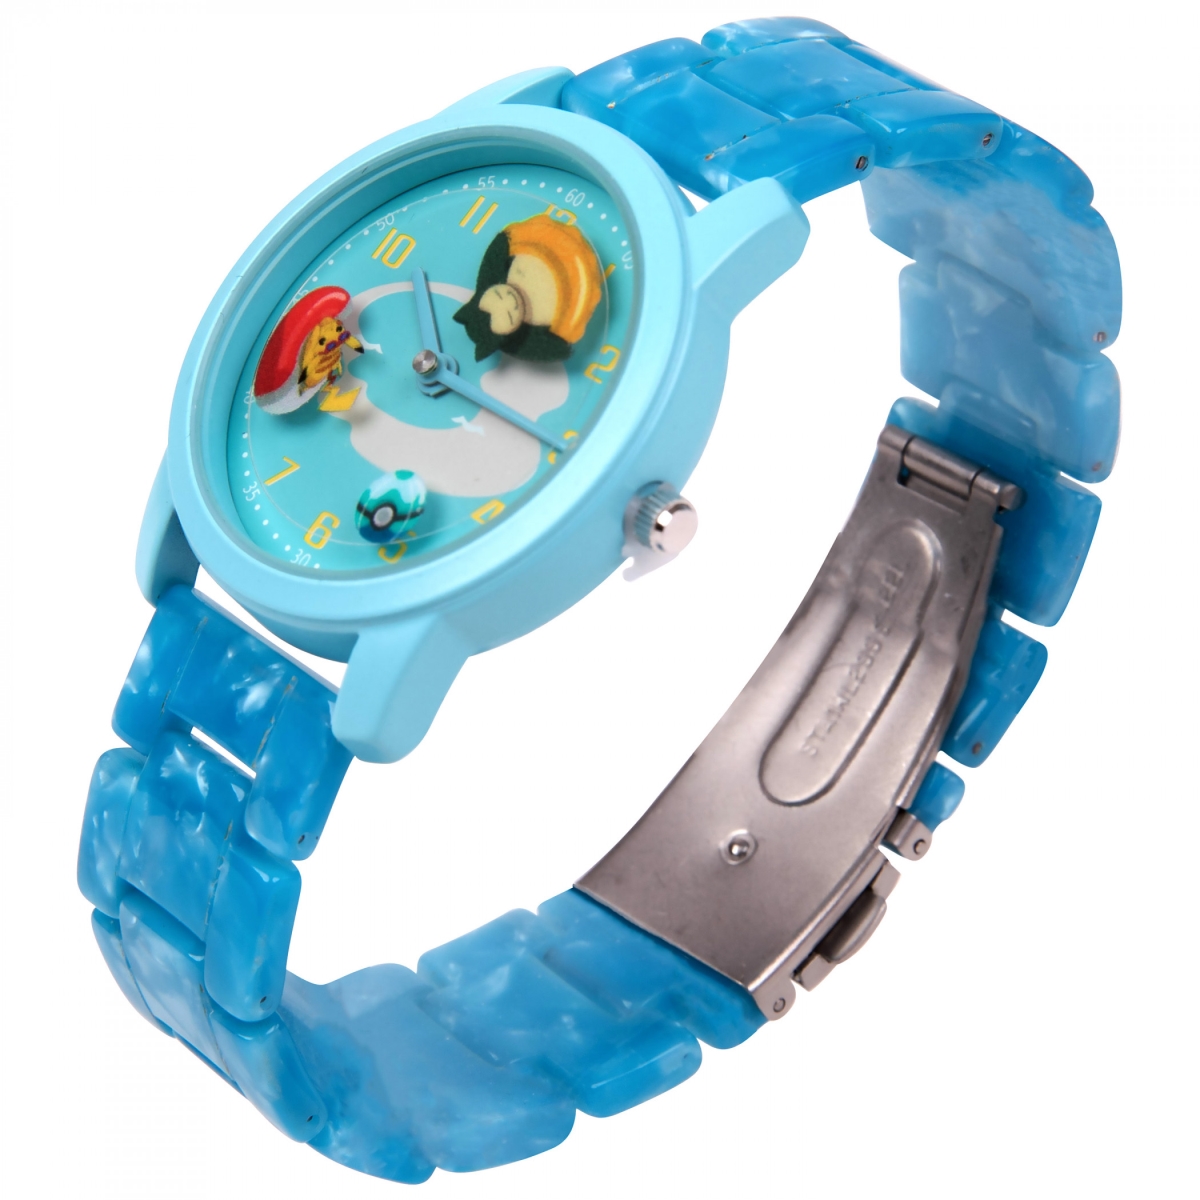 Picture of Pokemon 833641 Water Fun Time Watch with Rotating Watch Face